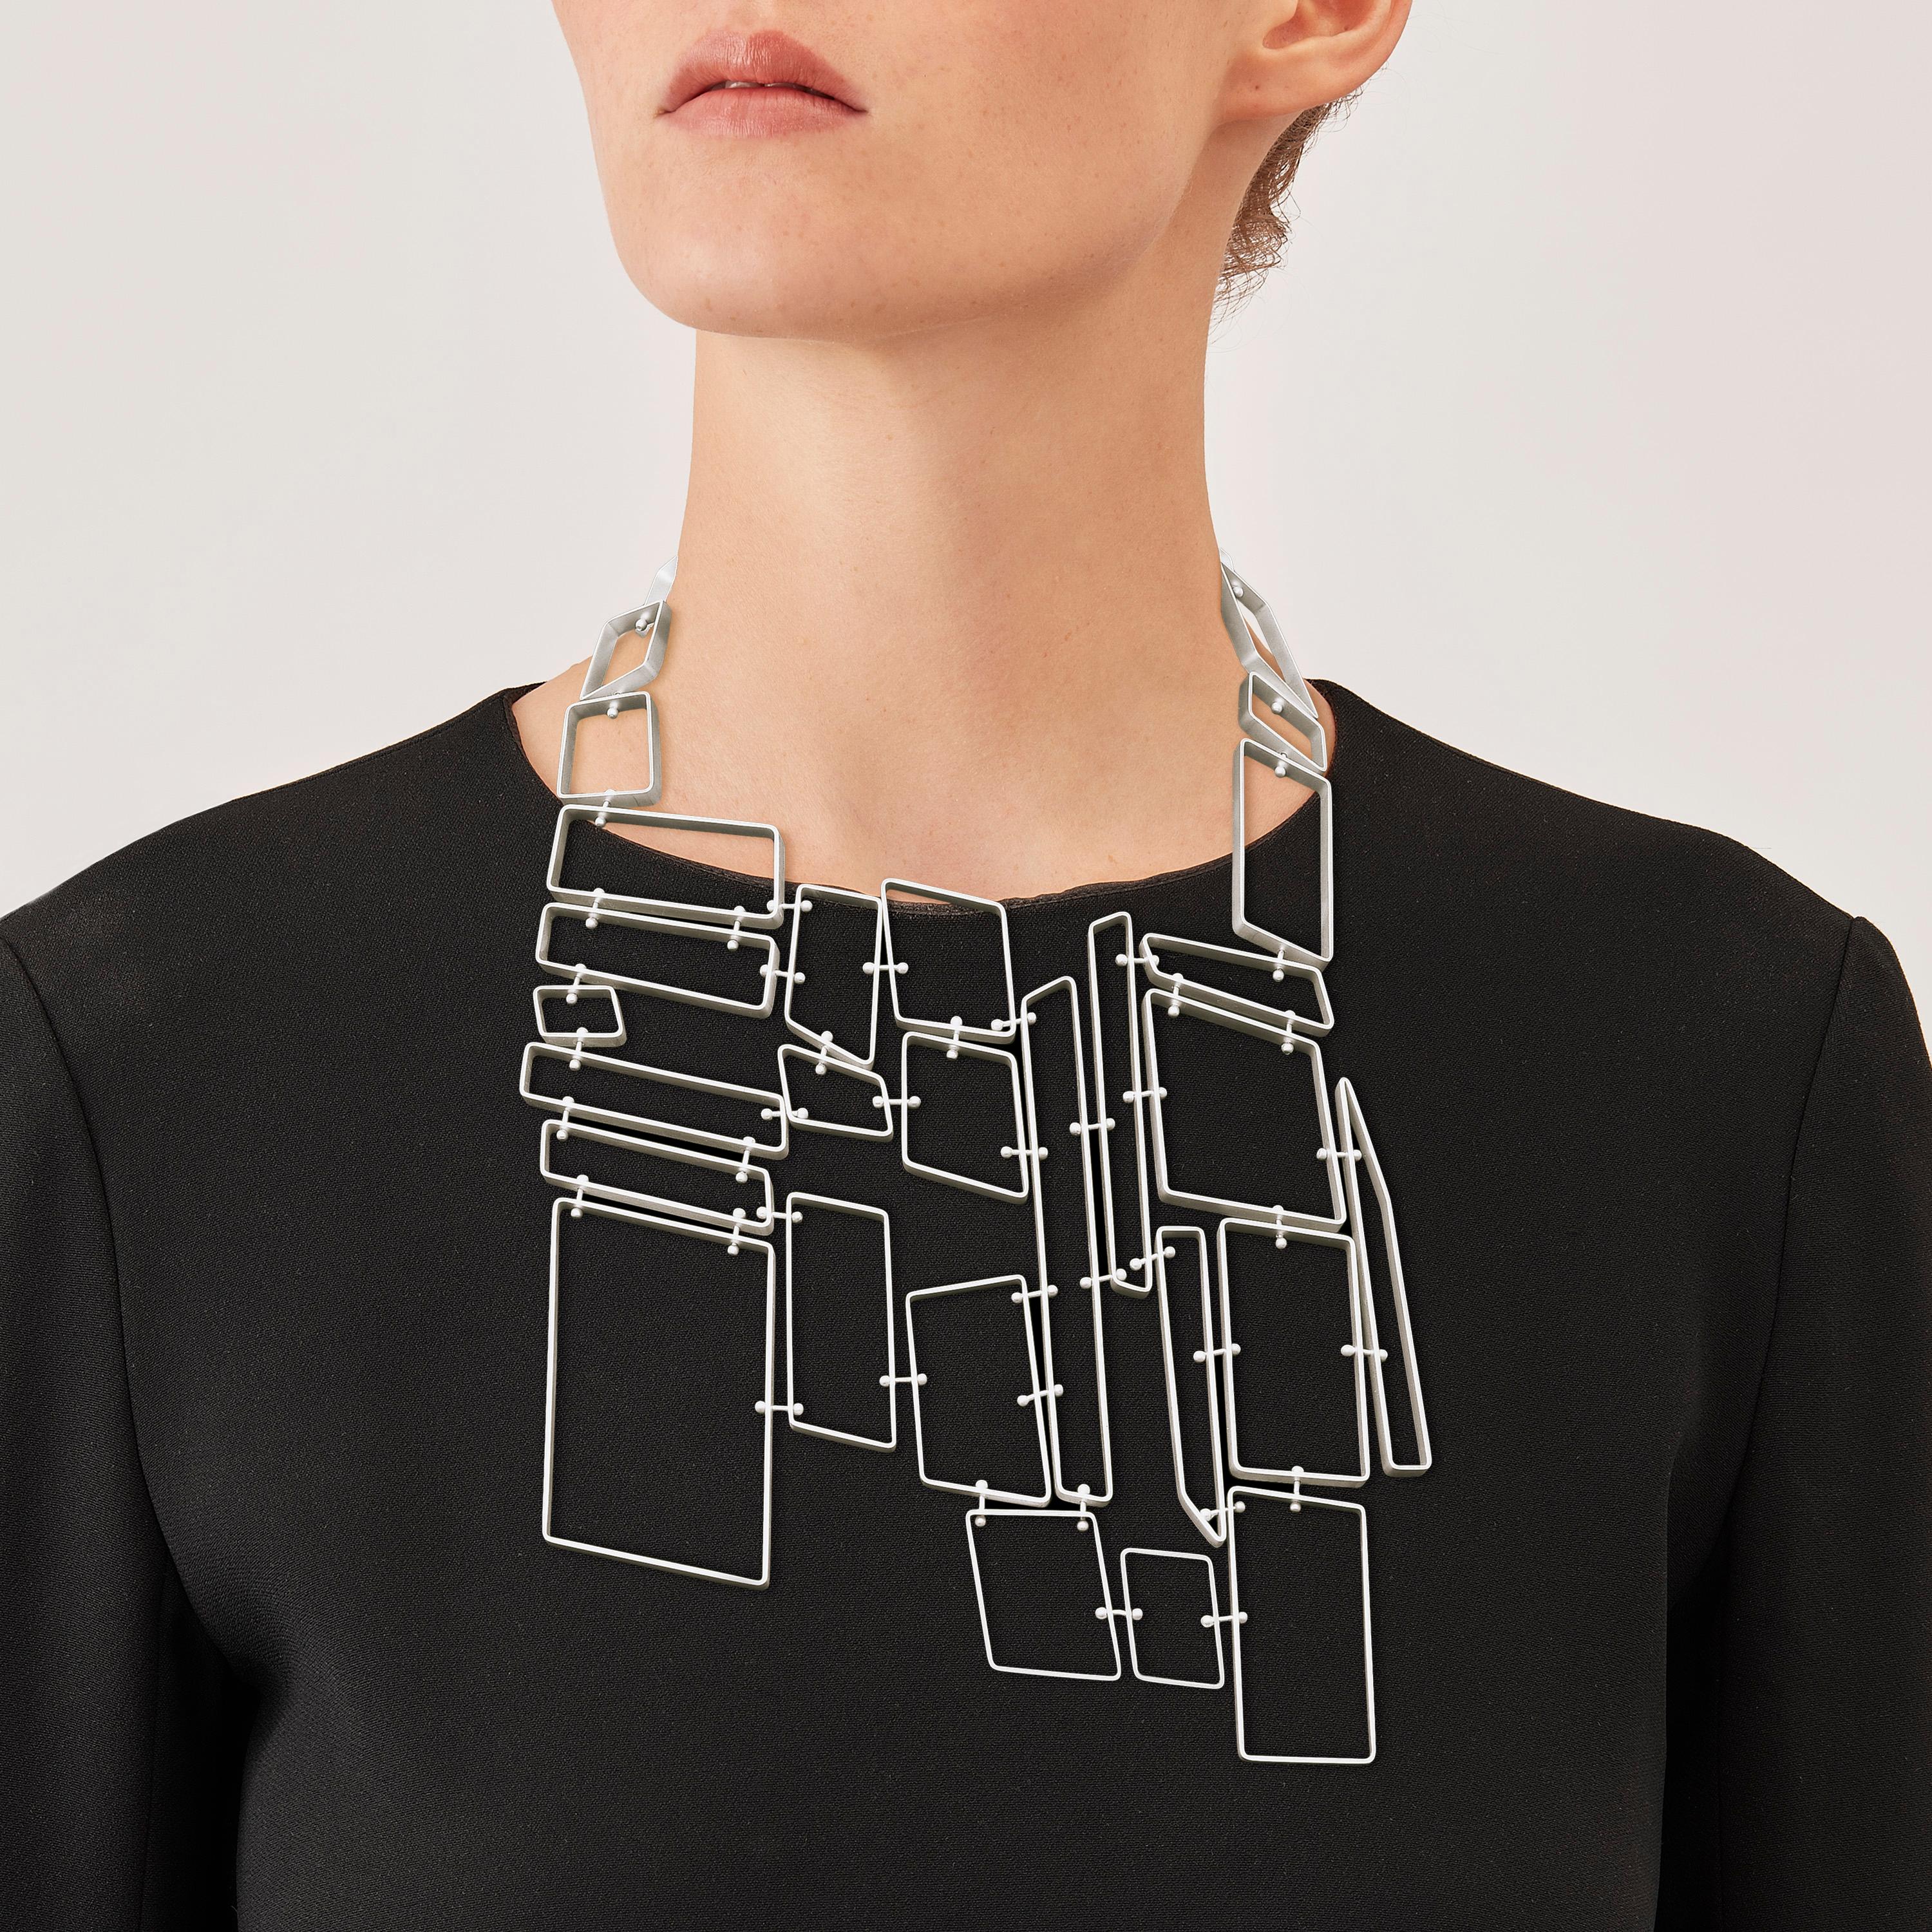 Made by hand in Nathalie Jean's Milan atelier in limited edition, the Saphir Infini Pectoral contemporary drop necklace is composed of matt sterling silver ribbon shapes with rounded edges. Clever hidden links allow the pieces to drape nicely around